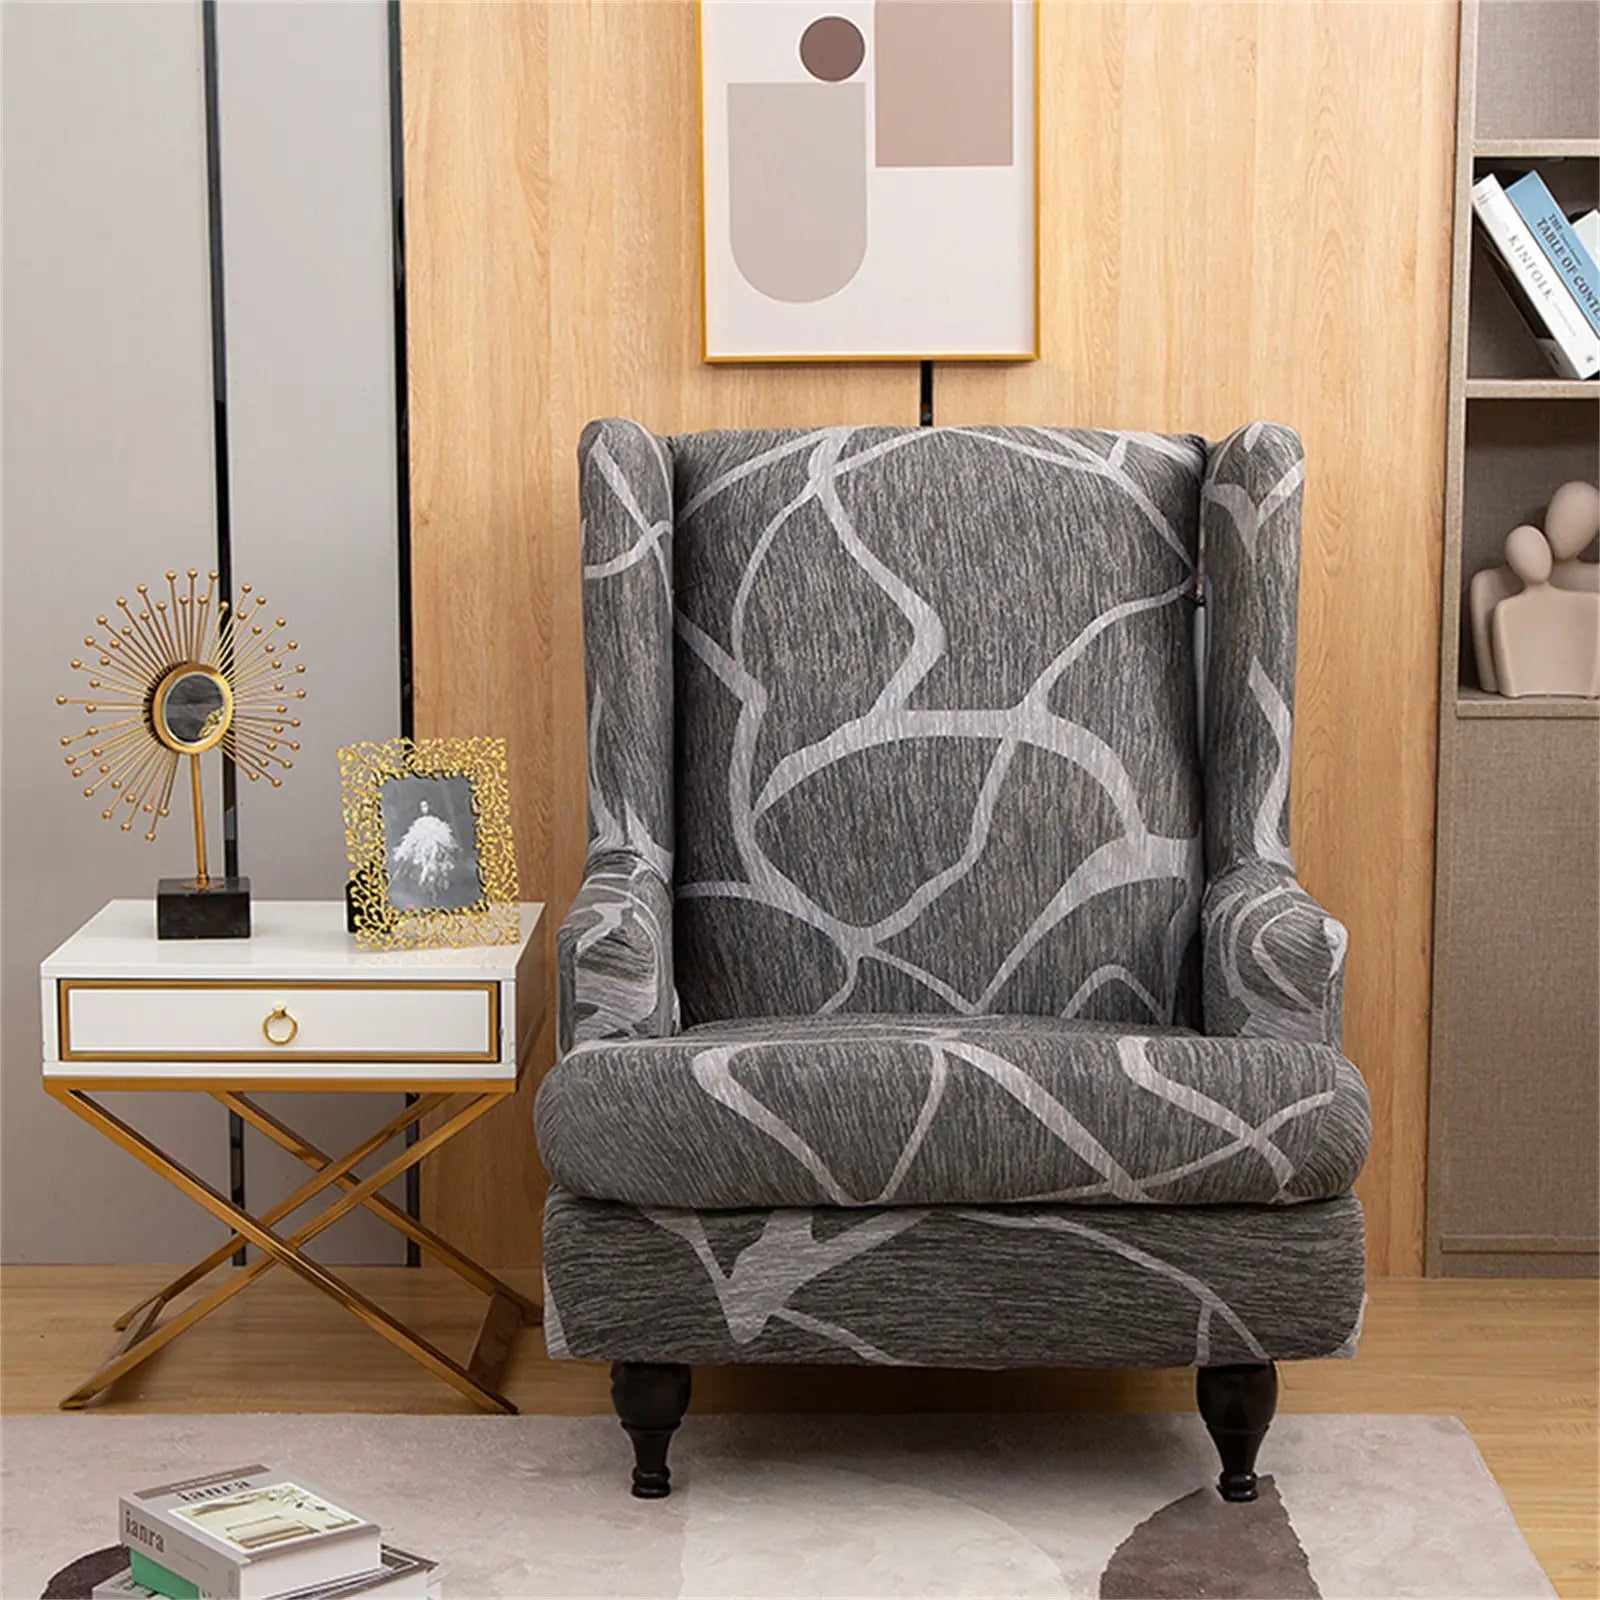 grey wingback reupholster - Fabric Spray Paint